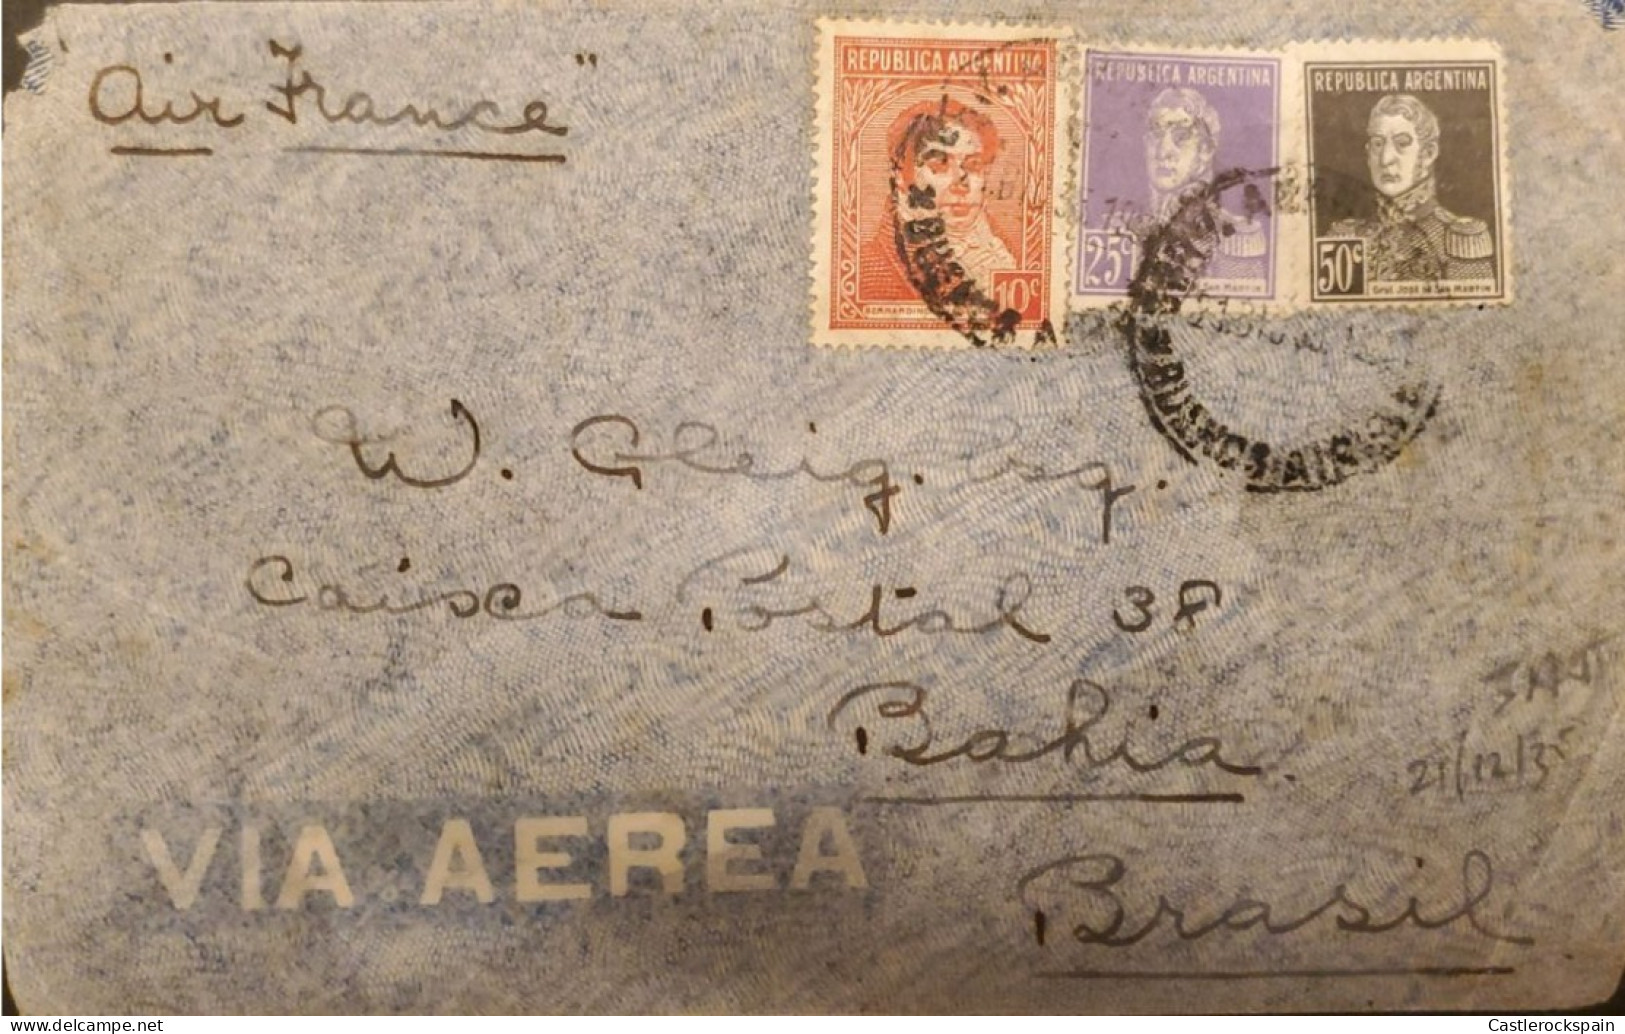 MI) 1935, ARGENTINA, AIR FRANCE, FROM BUENOS AIRES TO BAHIA - BRAZIL, AIR MAIL, GRAL SAN MARTIN AND RIVADAVIA STAMPS - Used Stamps